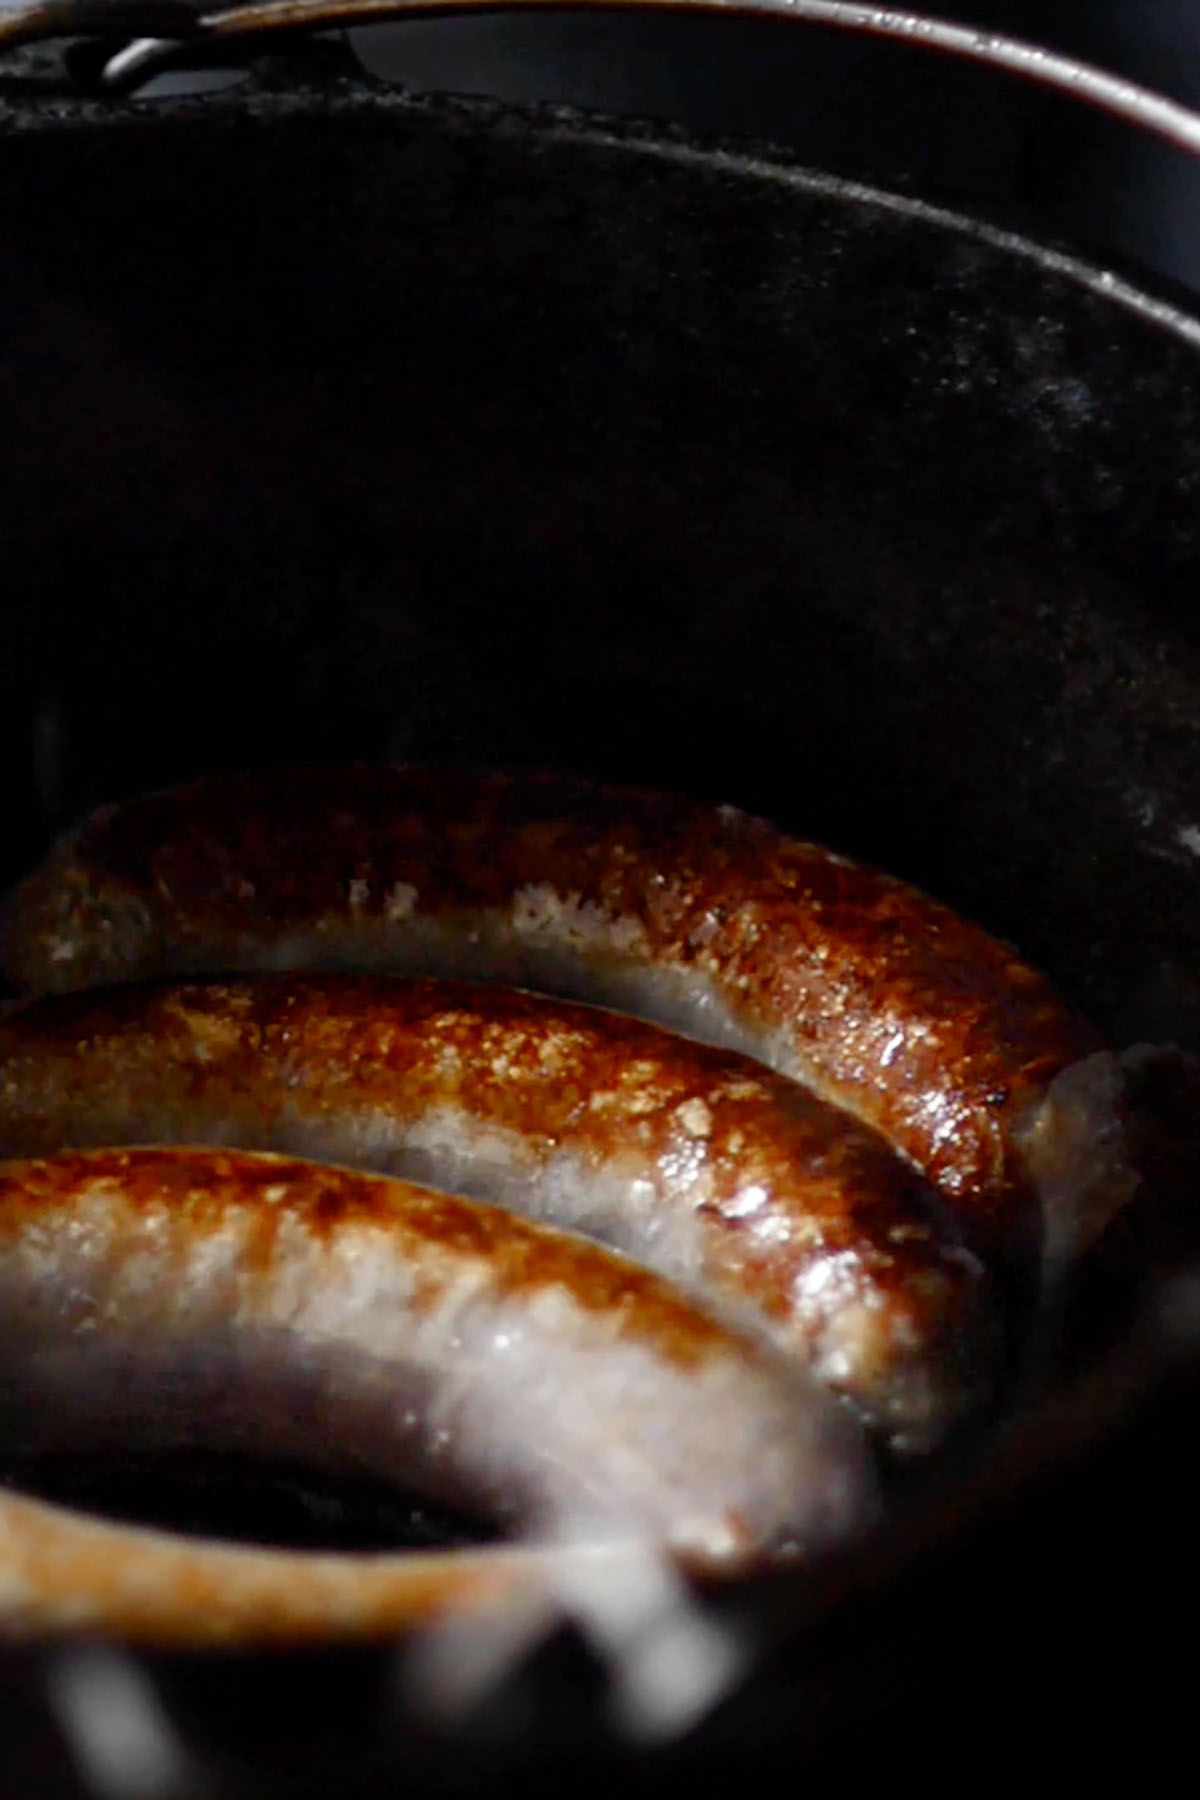 Bratwurst browned in a cast iron dutch oven.